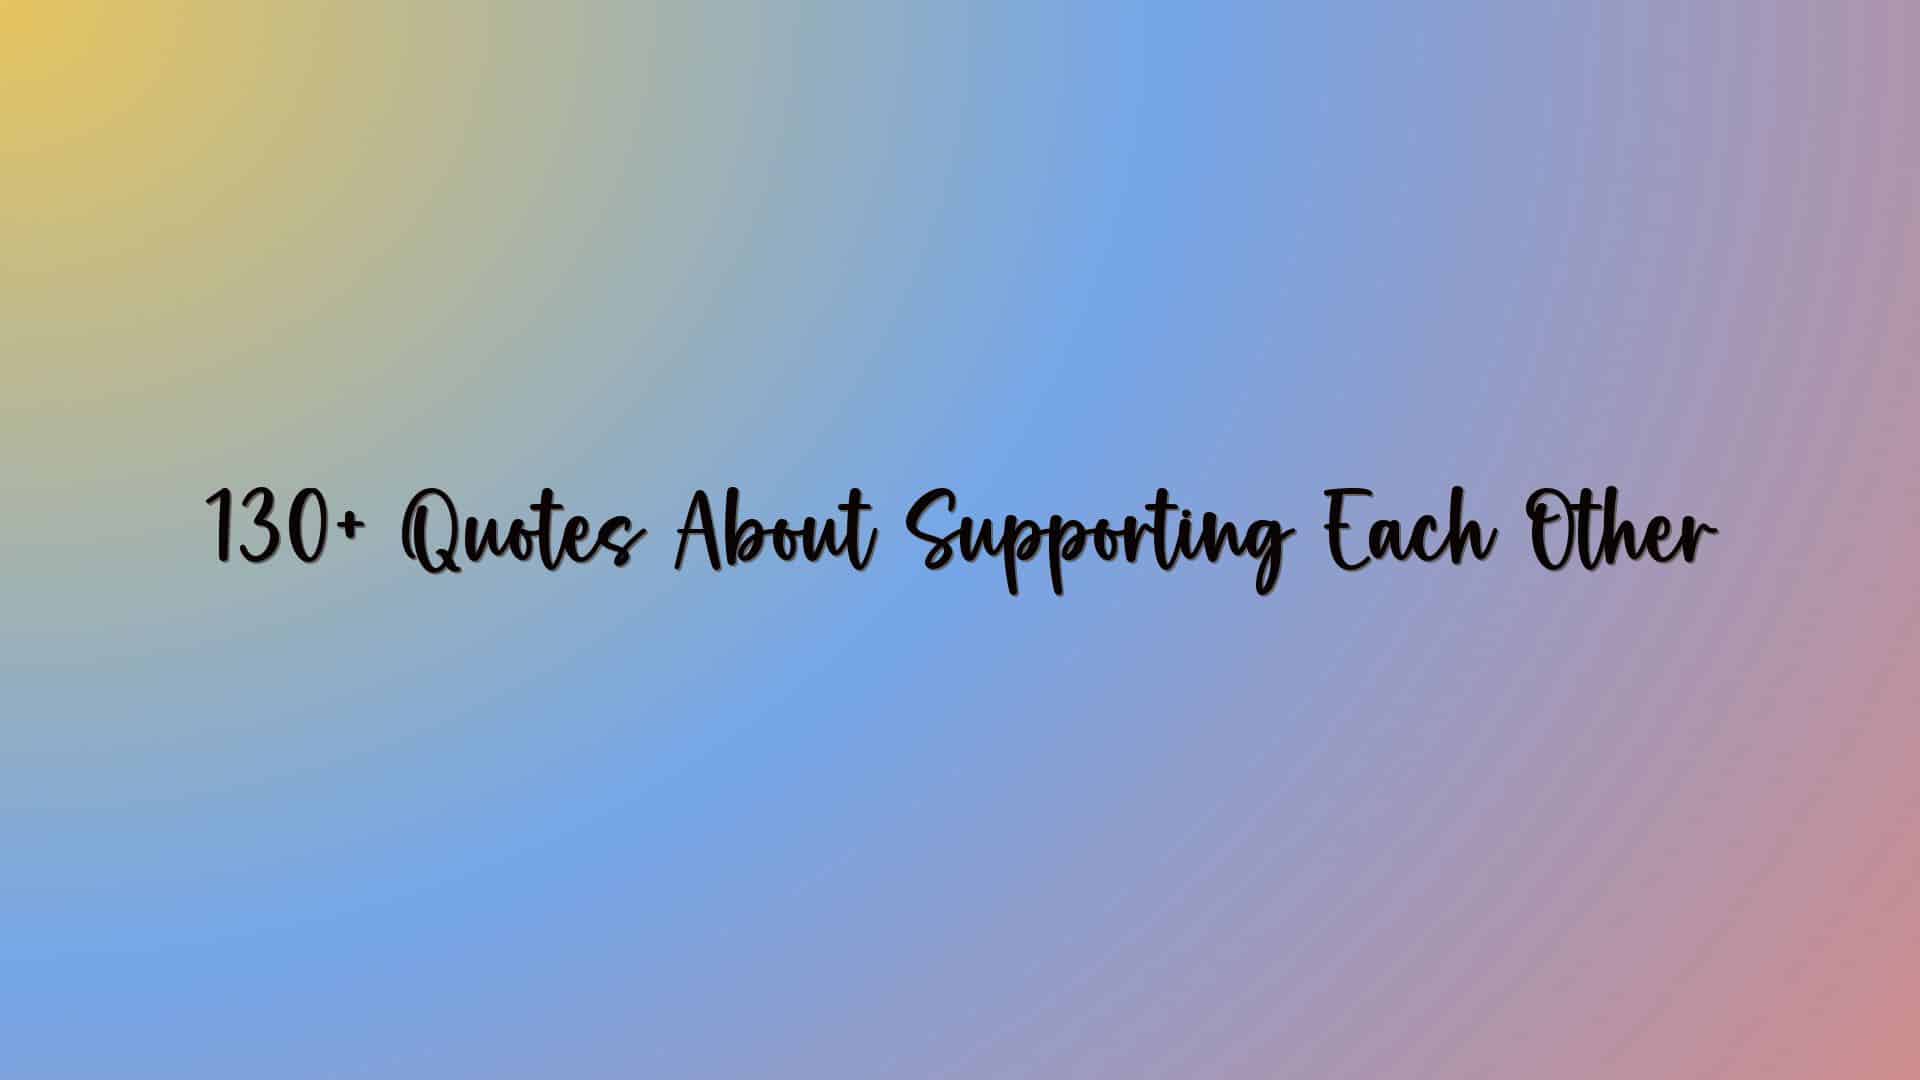 130+ Quotes About Supporting Each Other